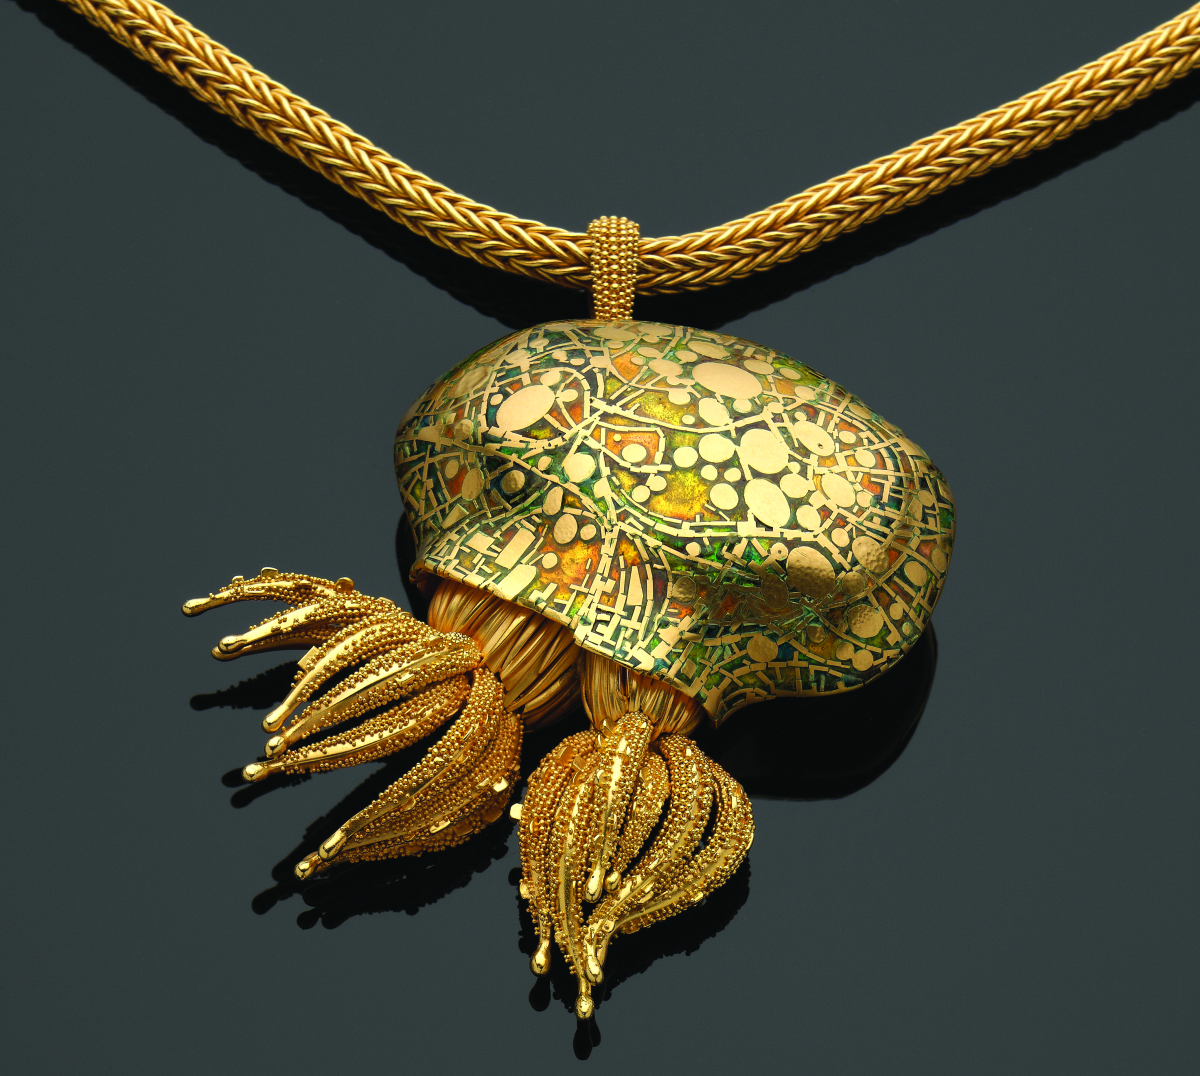 John Paul Miller (1918–2013), an American jewelry designer and goldsmith, was honored with an exhibition at the Cleveland Museum of Art in 2010. Enameling and granulation were among the techniques he used to ornament his creatures of earth, sky and sea, illustrated in “Polyp Colony,” 1995.